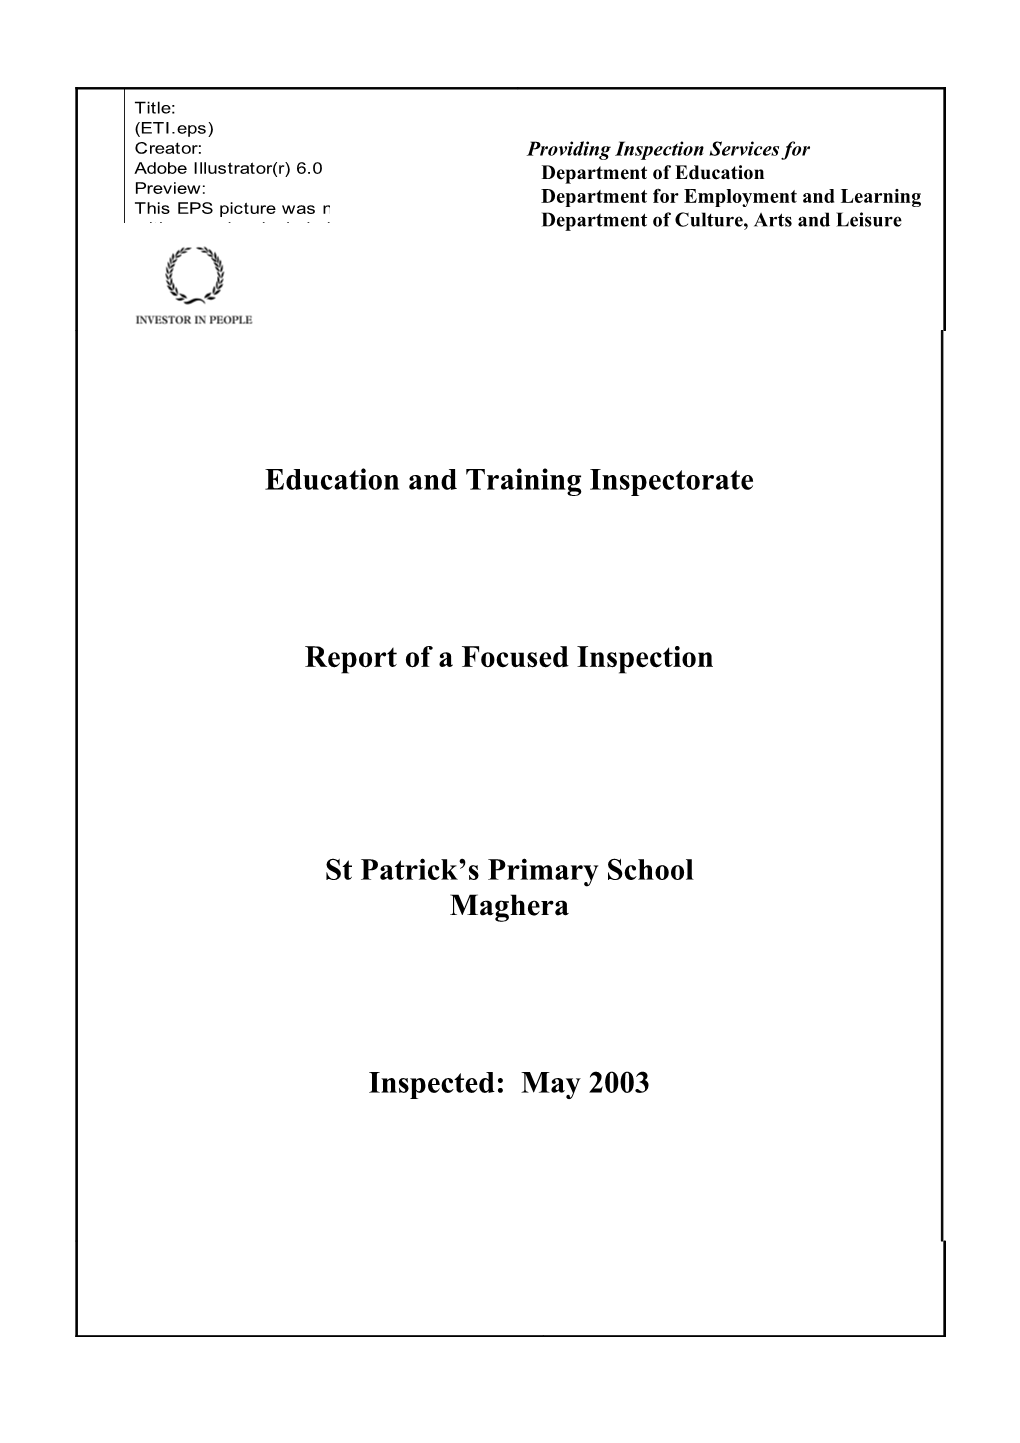 Report of a Focused Inspection of St Patrick's Primary School Maghera May 2003